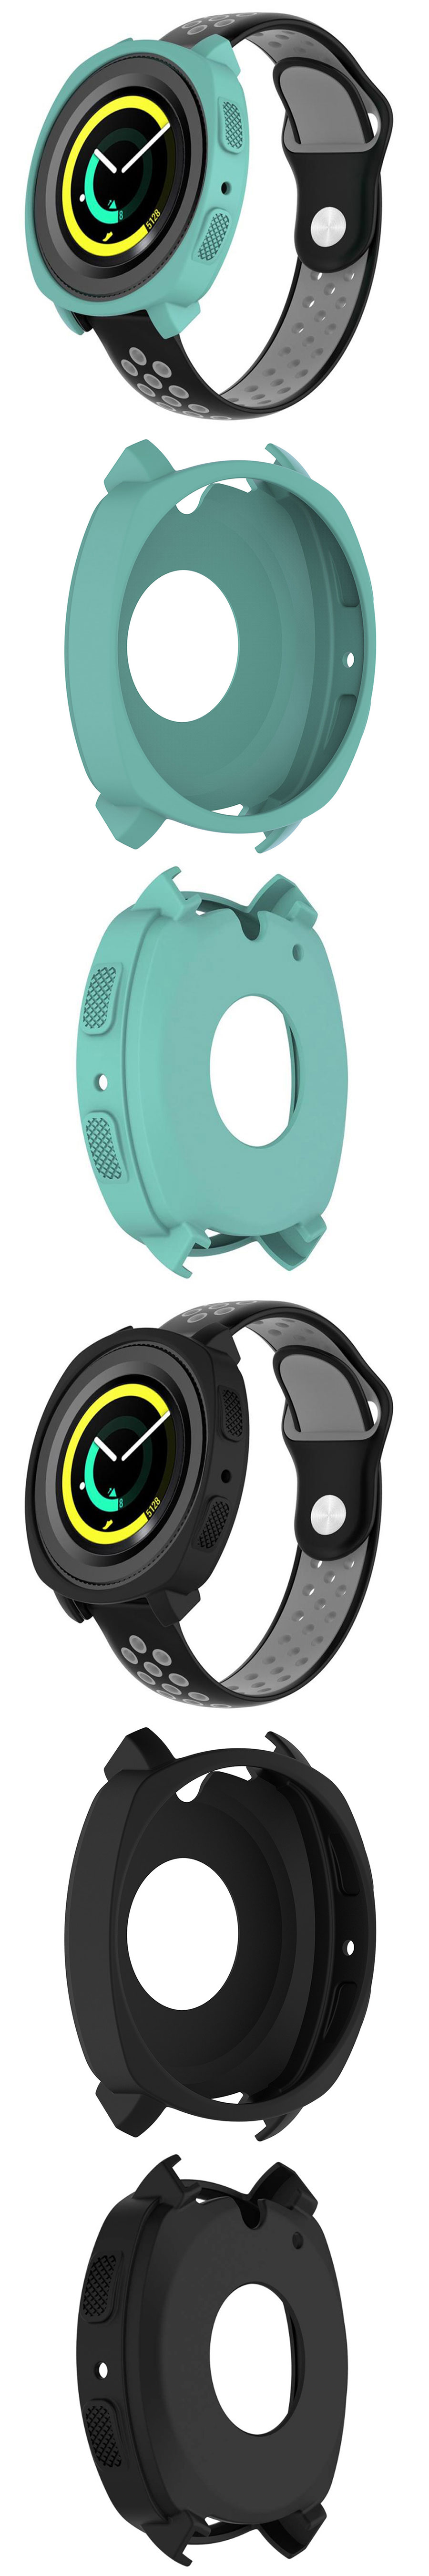 Colorful-Silicone-Protective-Watch-Case-Cover-Watch-Tools-for-Samsung-Gear-Sport-R600-1312915